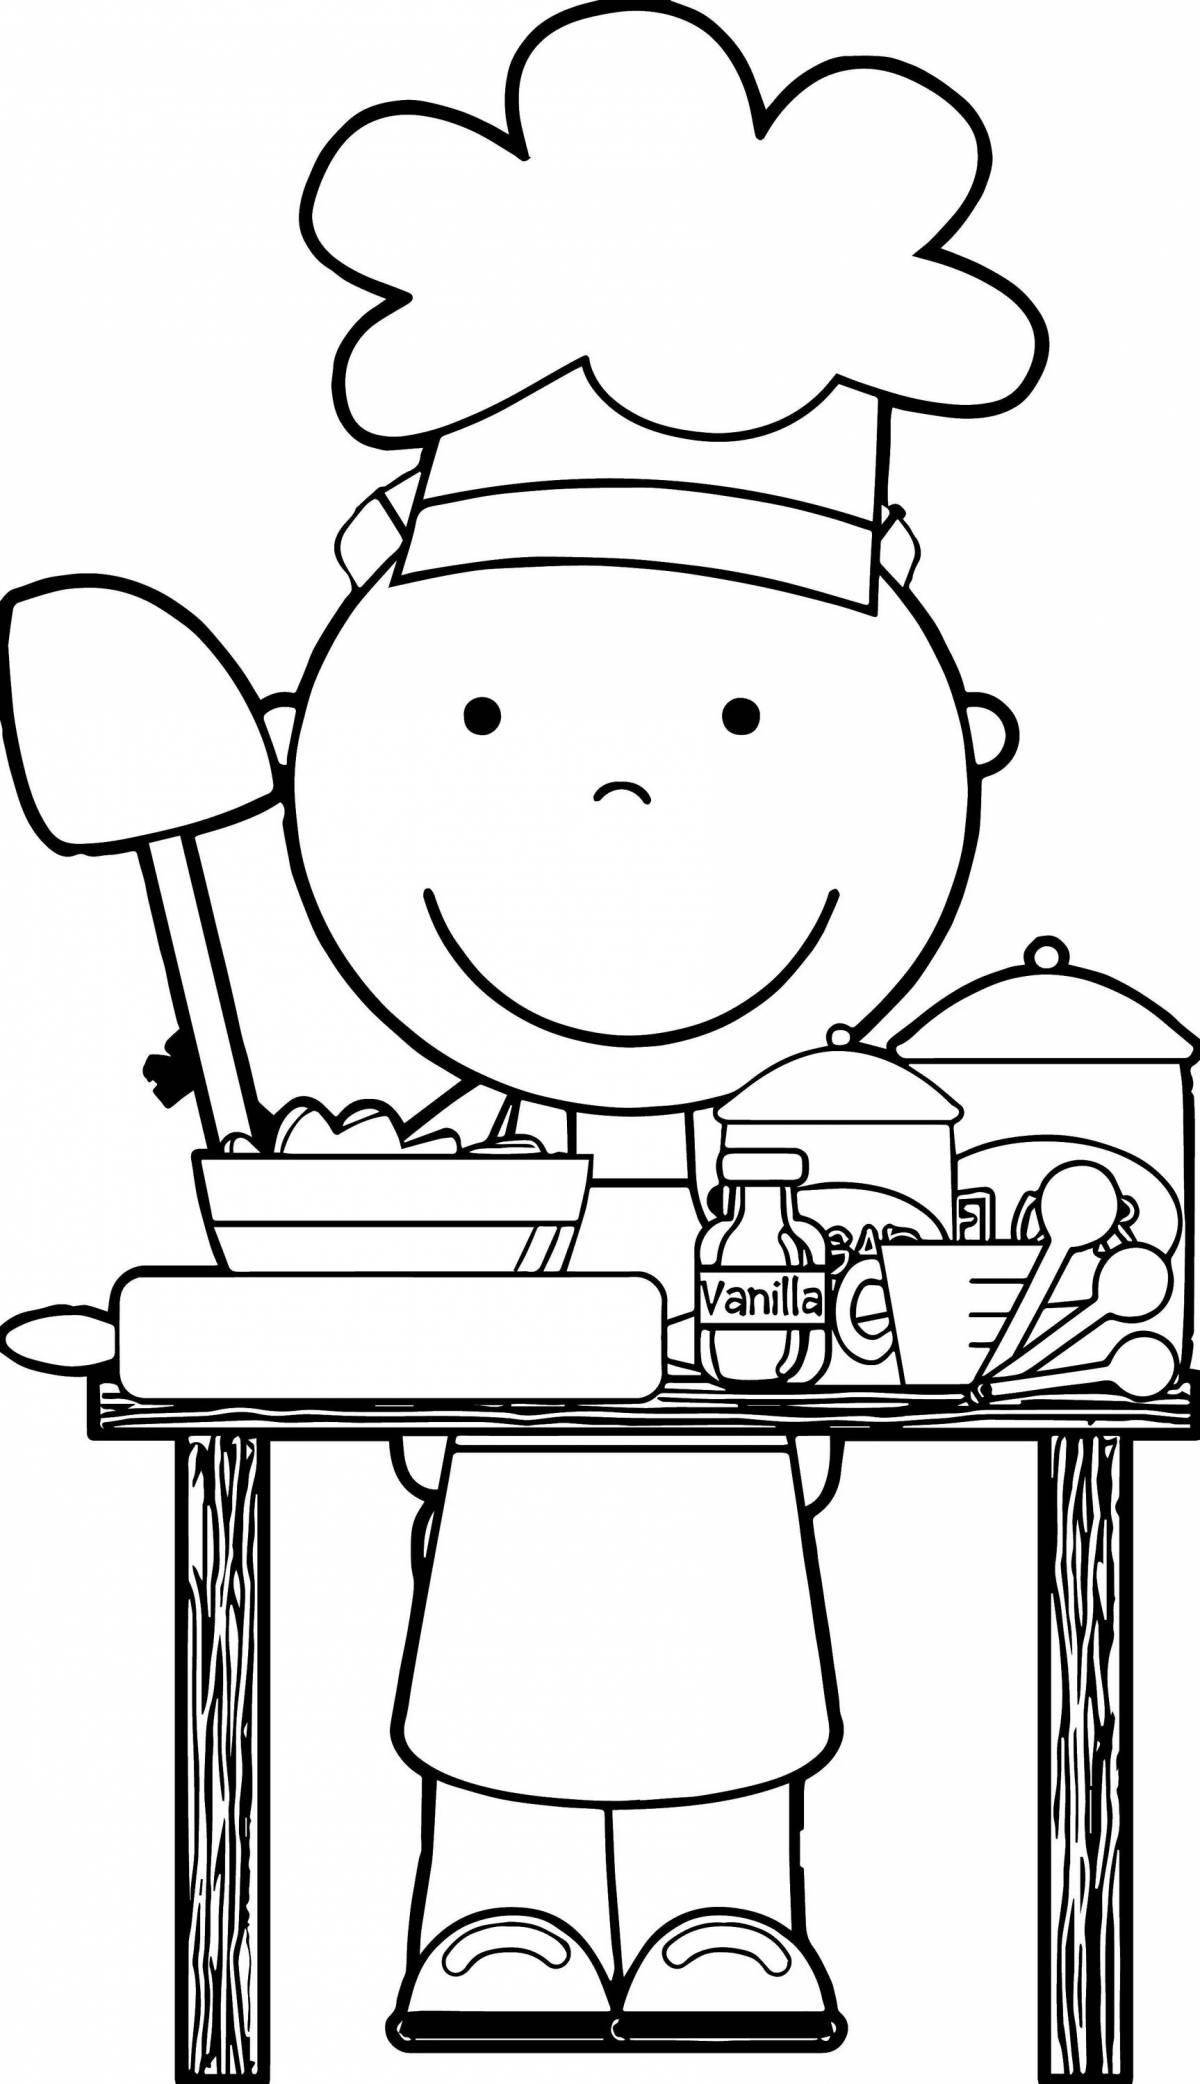 Coloring page energetic chef